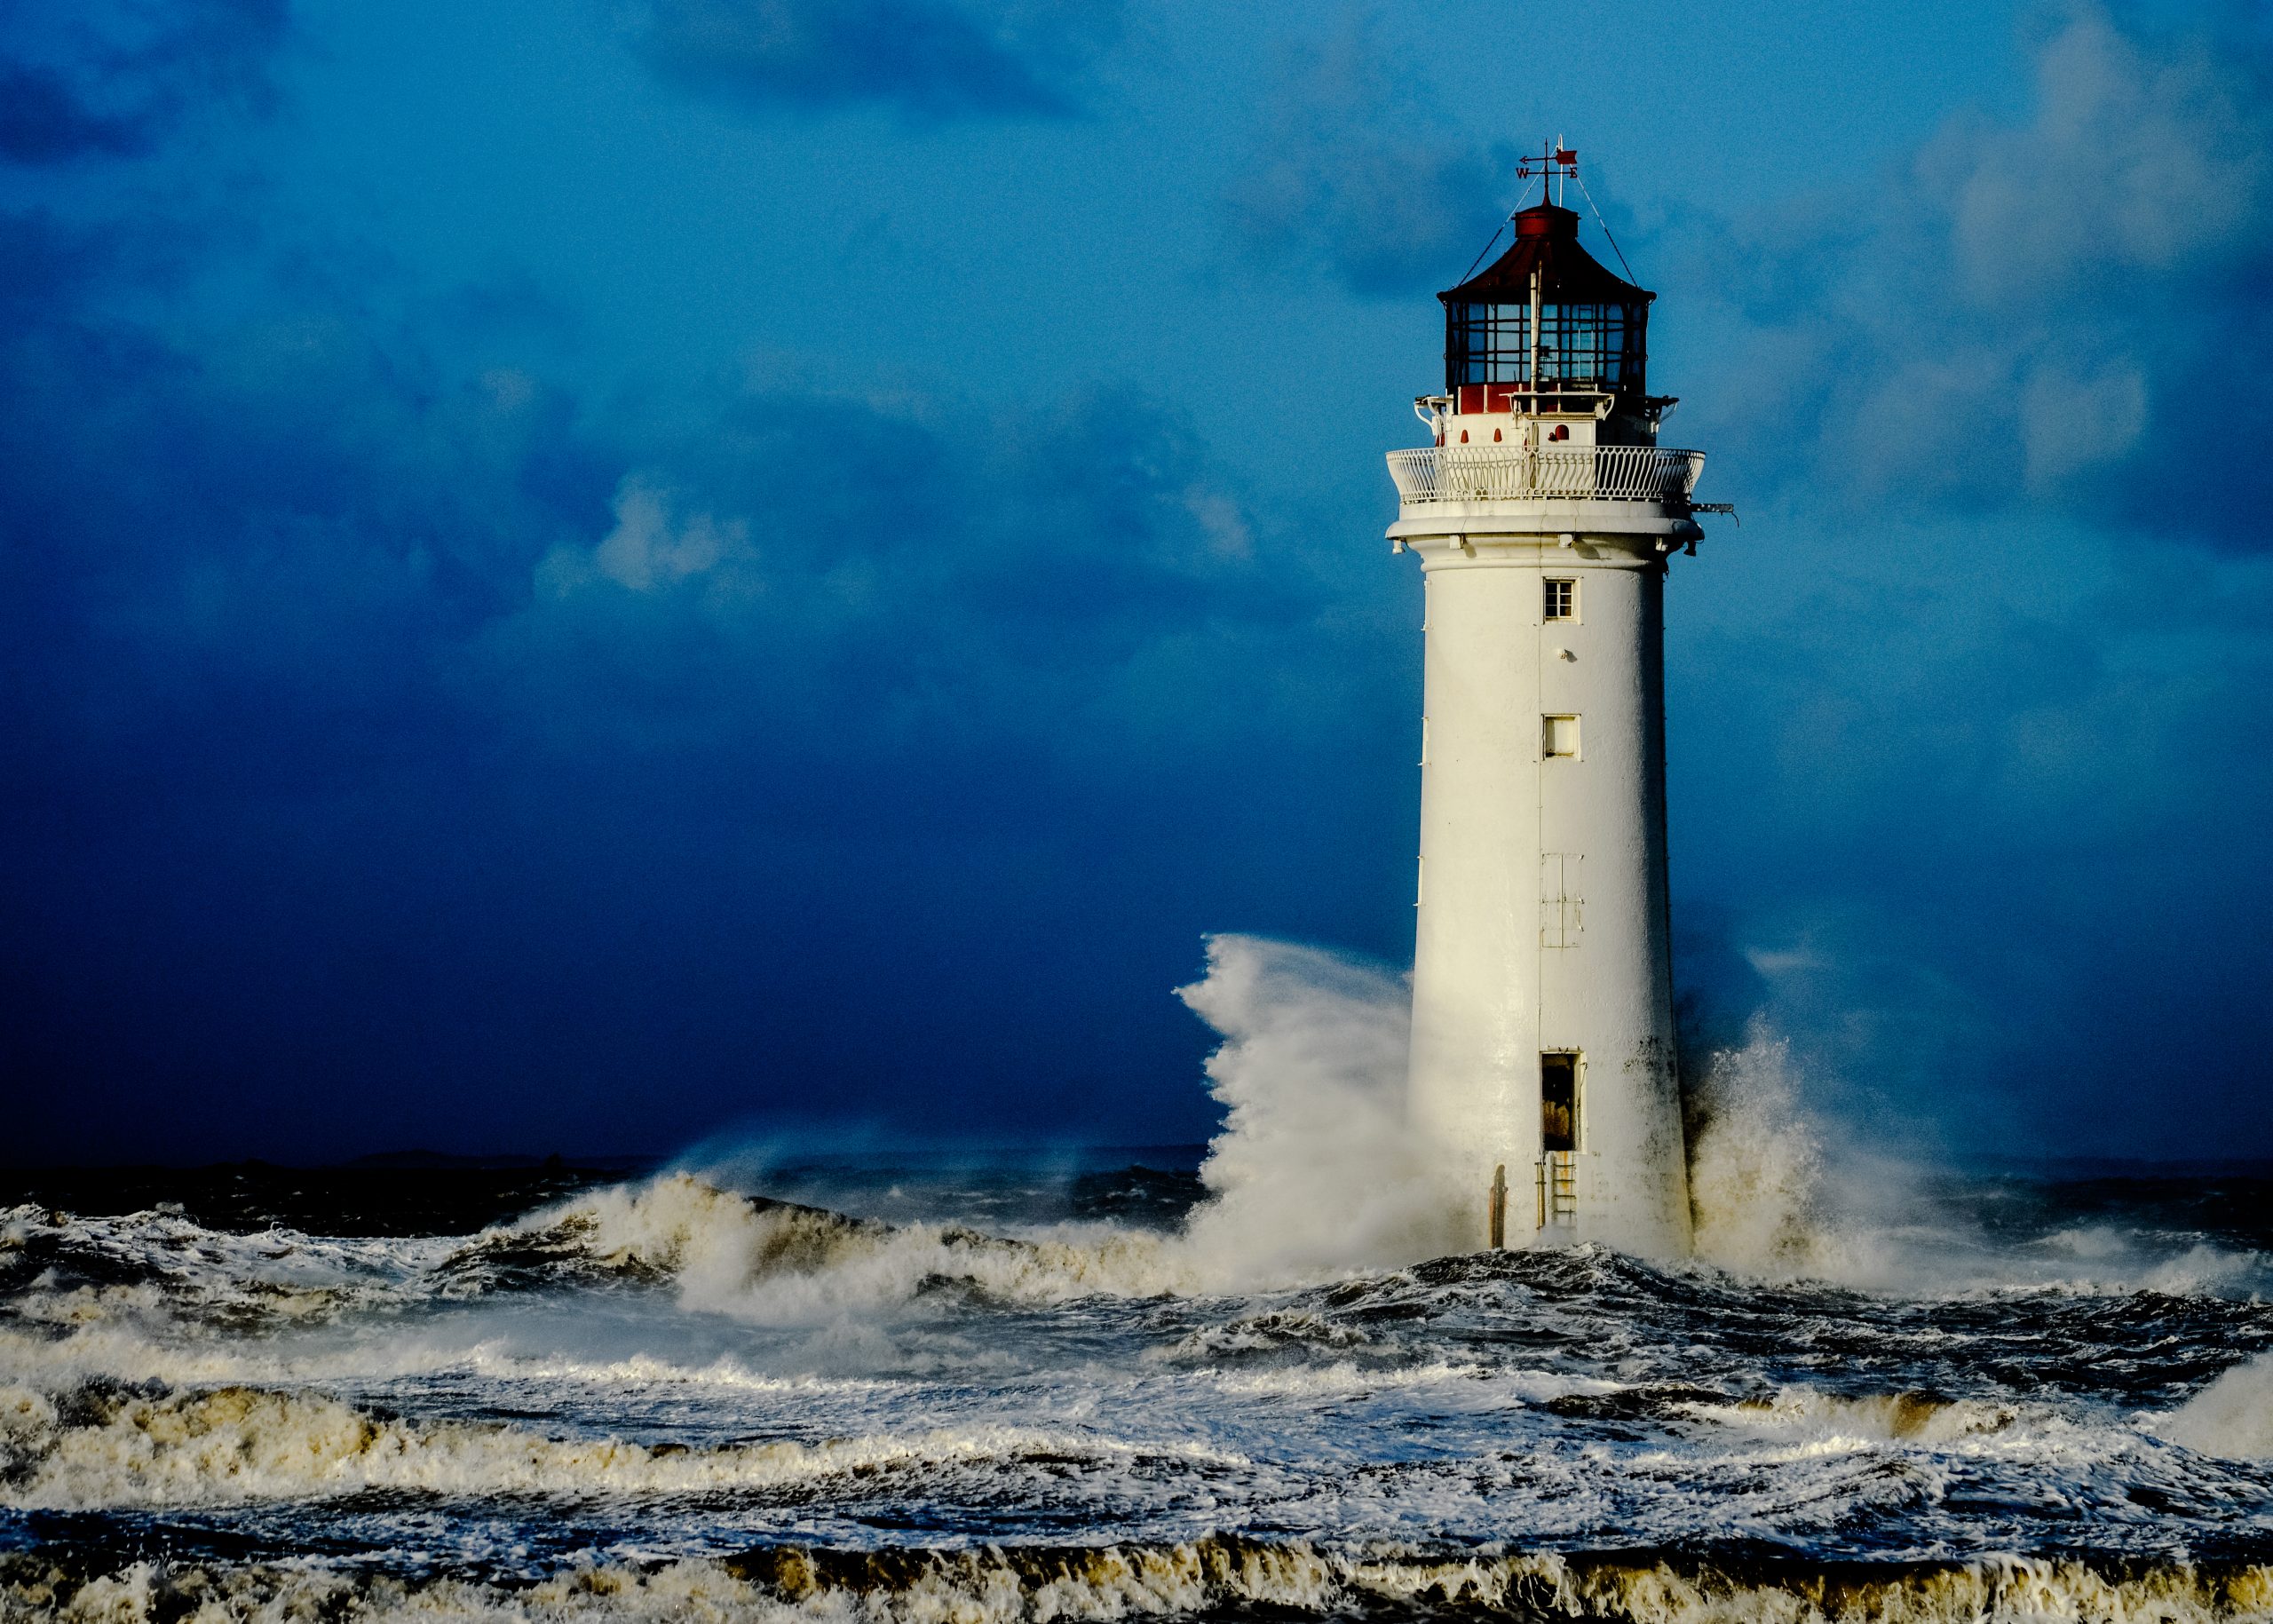 Lighthouse shows resilience by withstanding elements